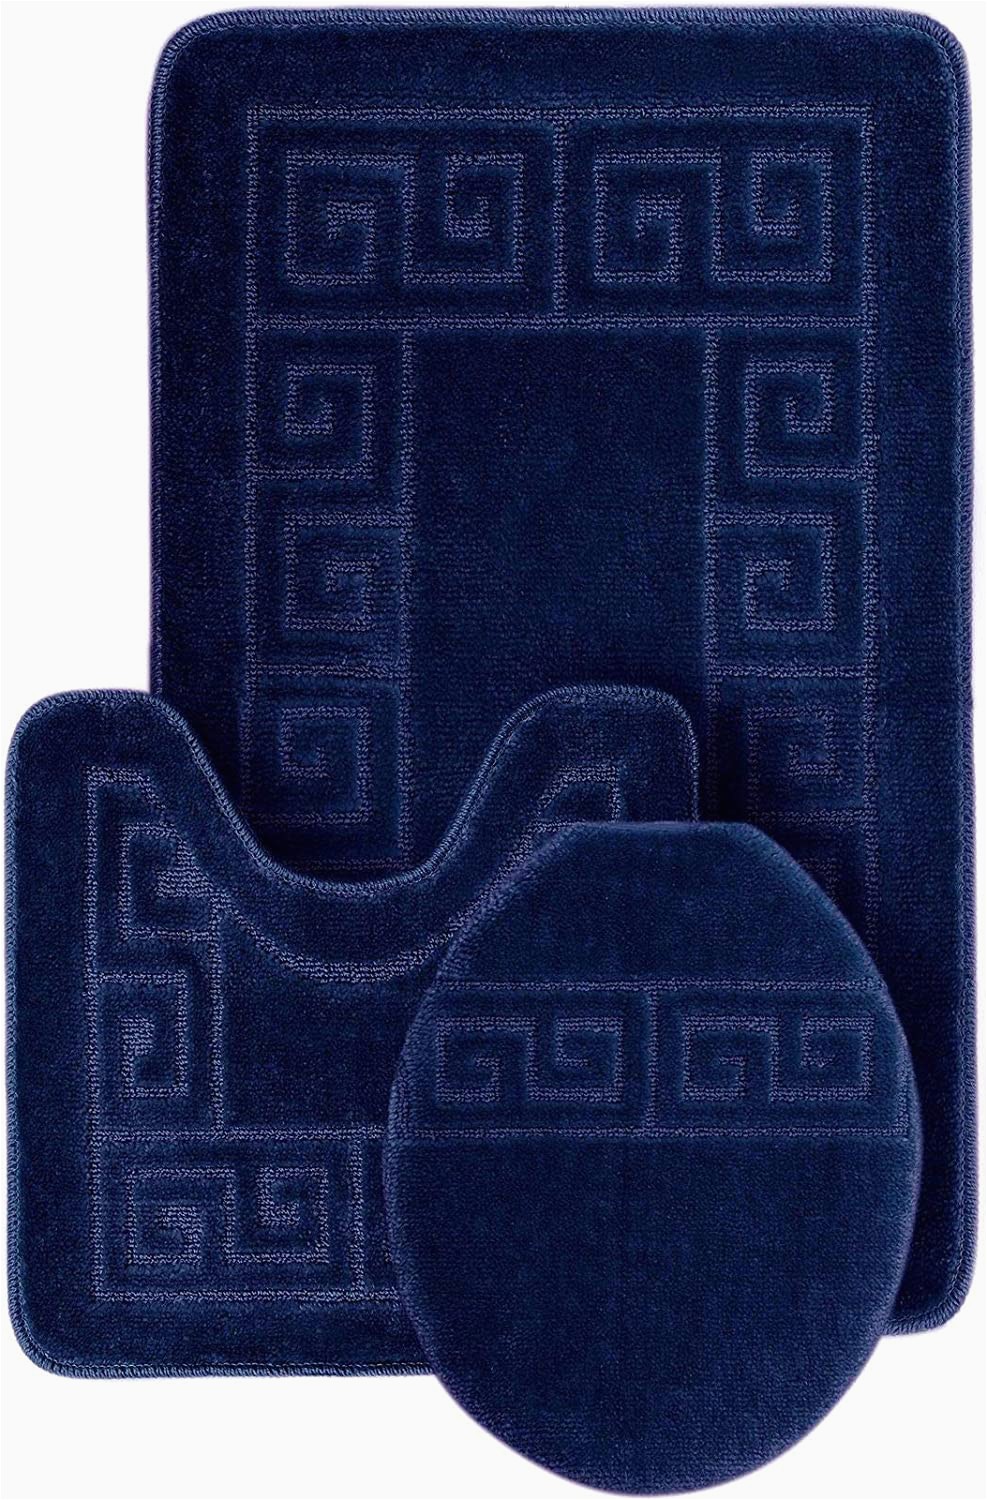 Cheap 3 Piece Bathroom Rug Sets Wpm World Products Mart Bathroom Rugs Set 3 Piece Bath Pattern Rug 20"x32" Contour Mats 20"x20" with Lid Cover Navy